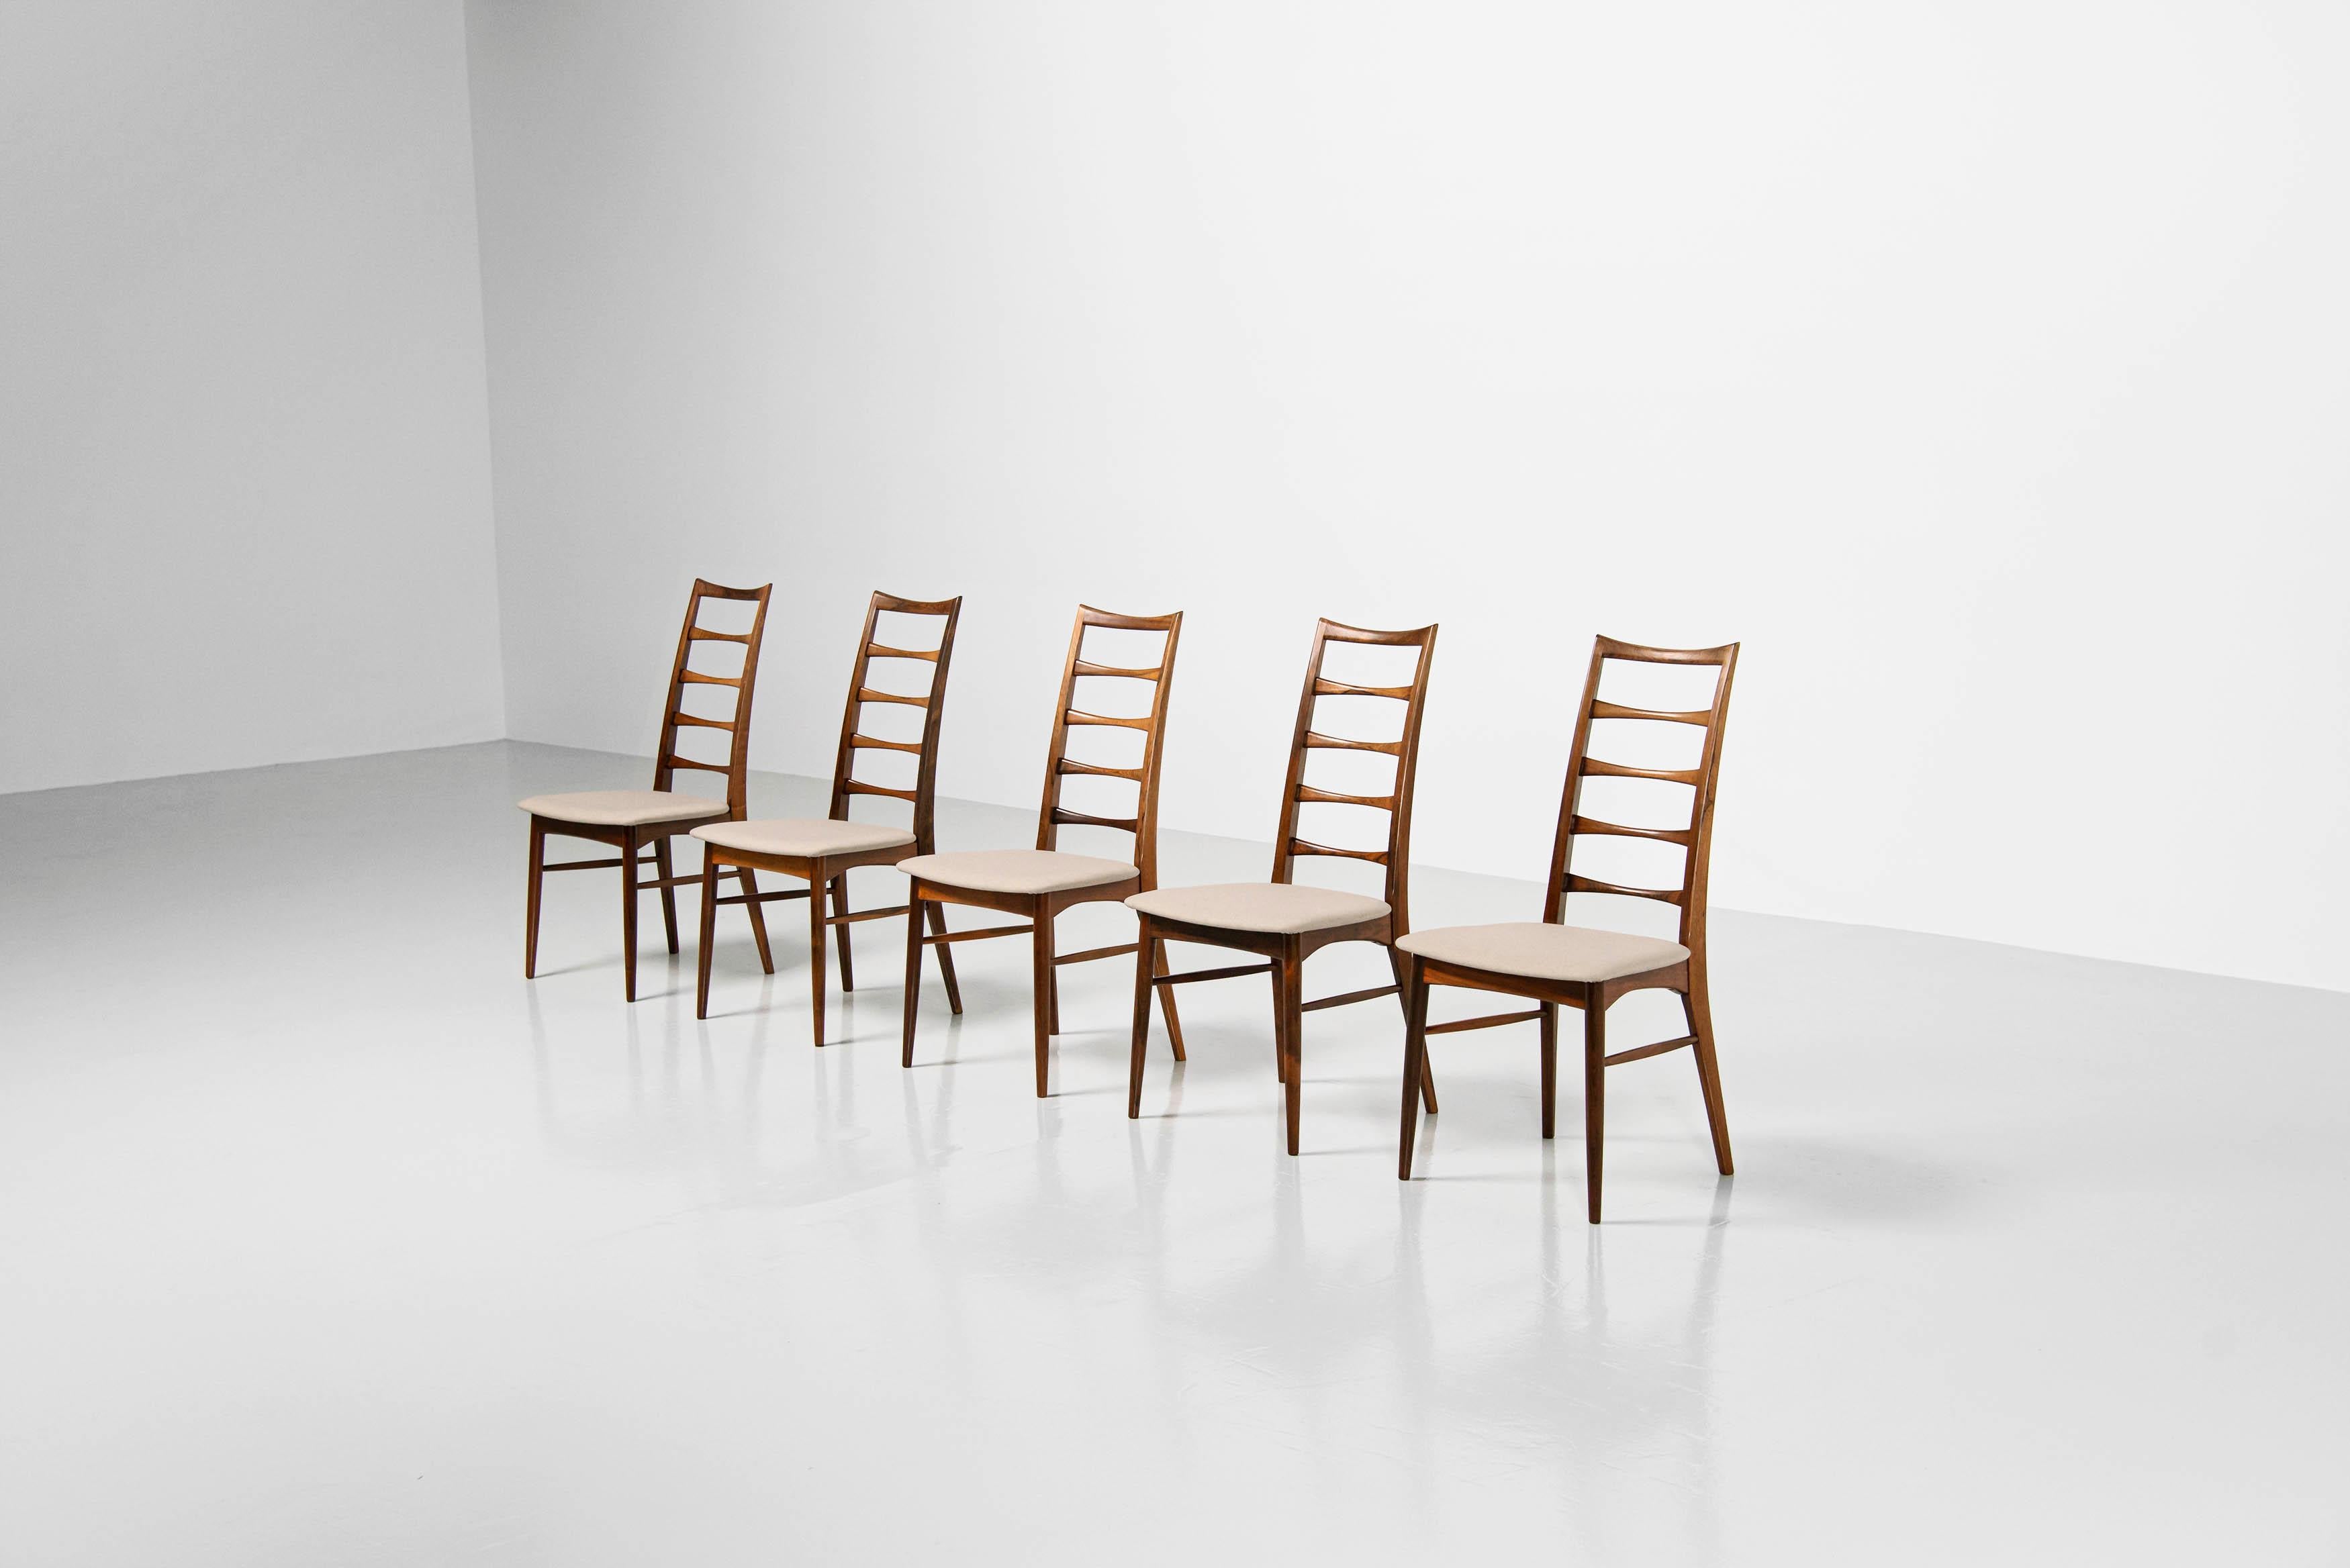 Beautiful sculptural set of 5 high back dining chairs model Lis, Designed by Niels Koefoed and manufactured by Koefoeds Møbelfabrik A/S, Denmark 1961. These chairs are made of solid rosewood with amazing grain to the wood and they have been